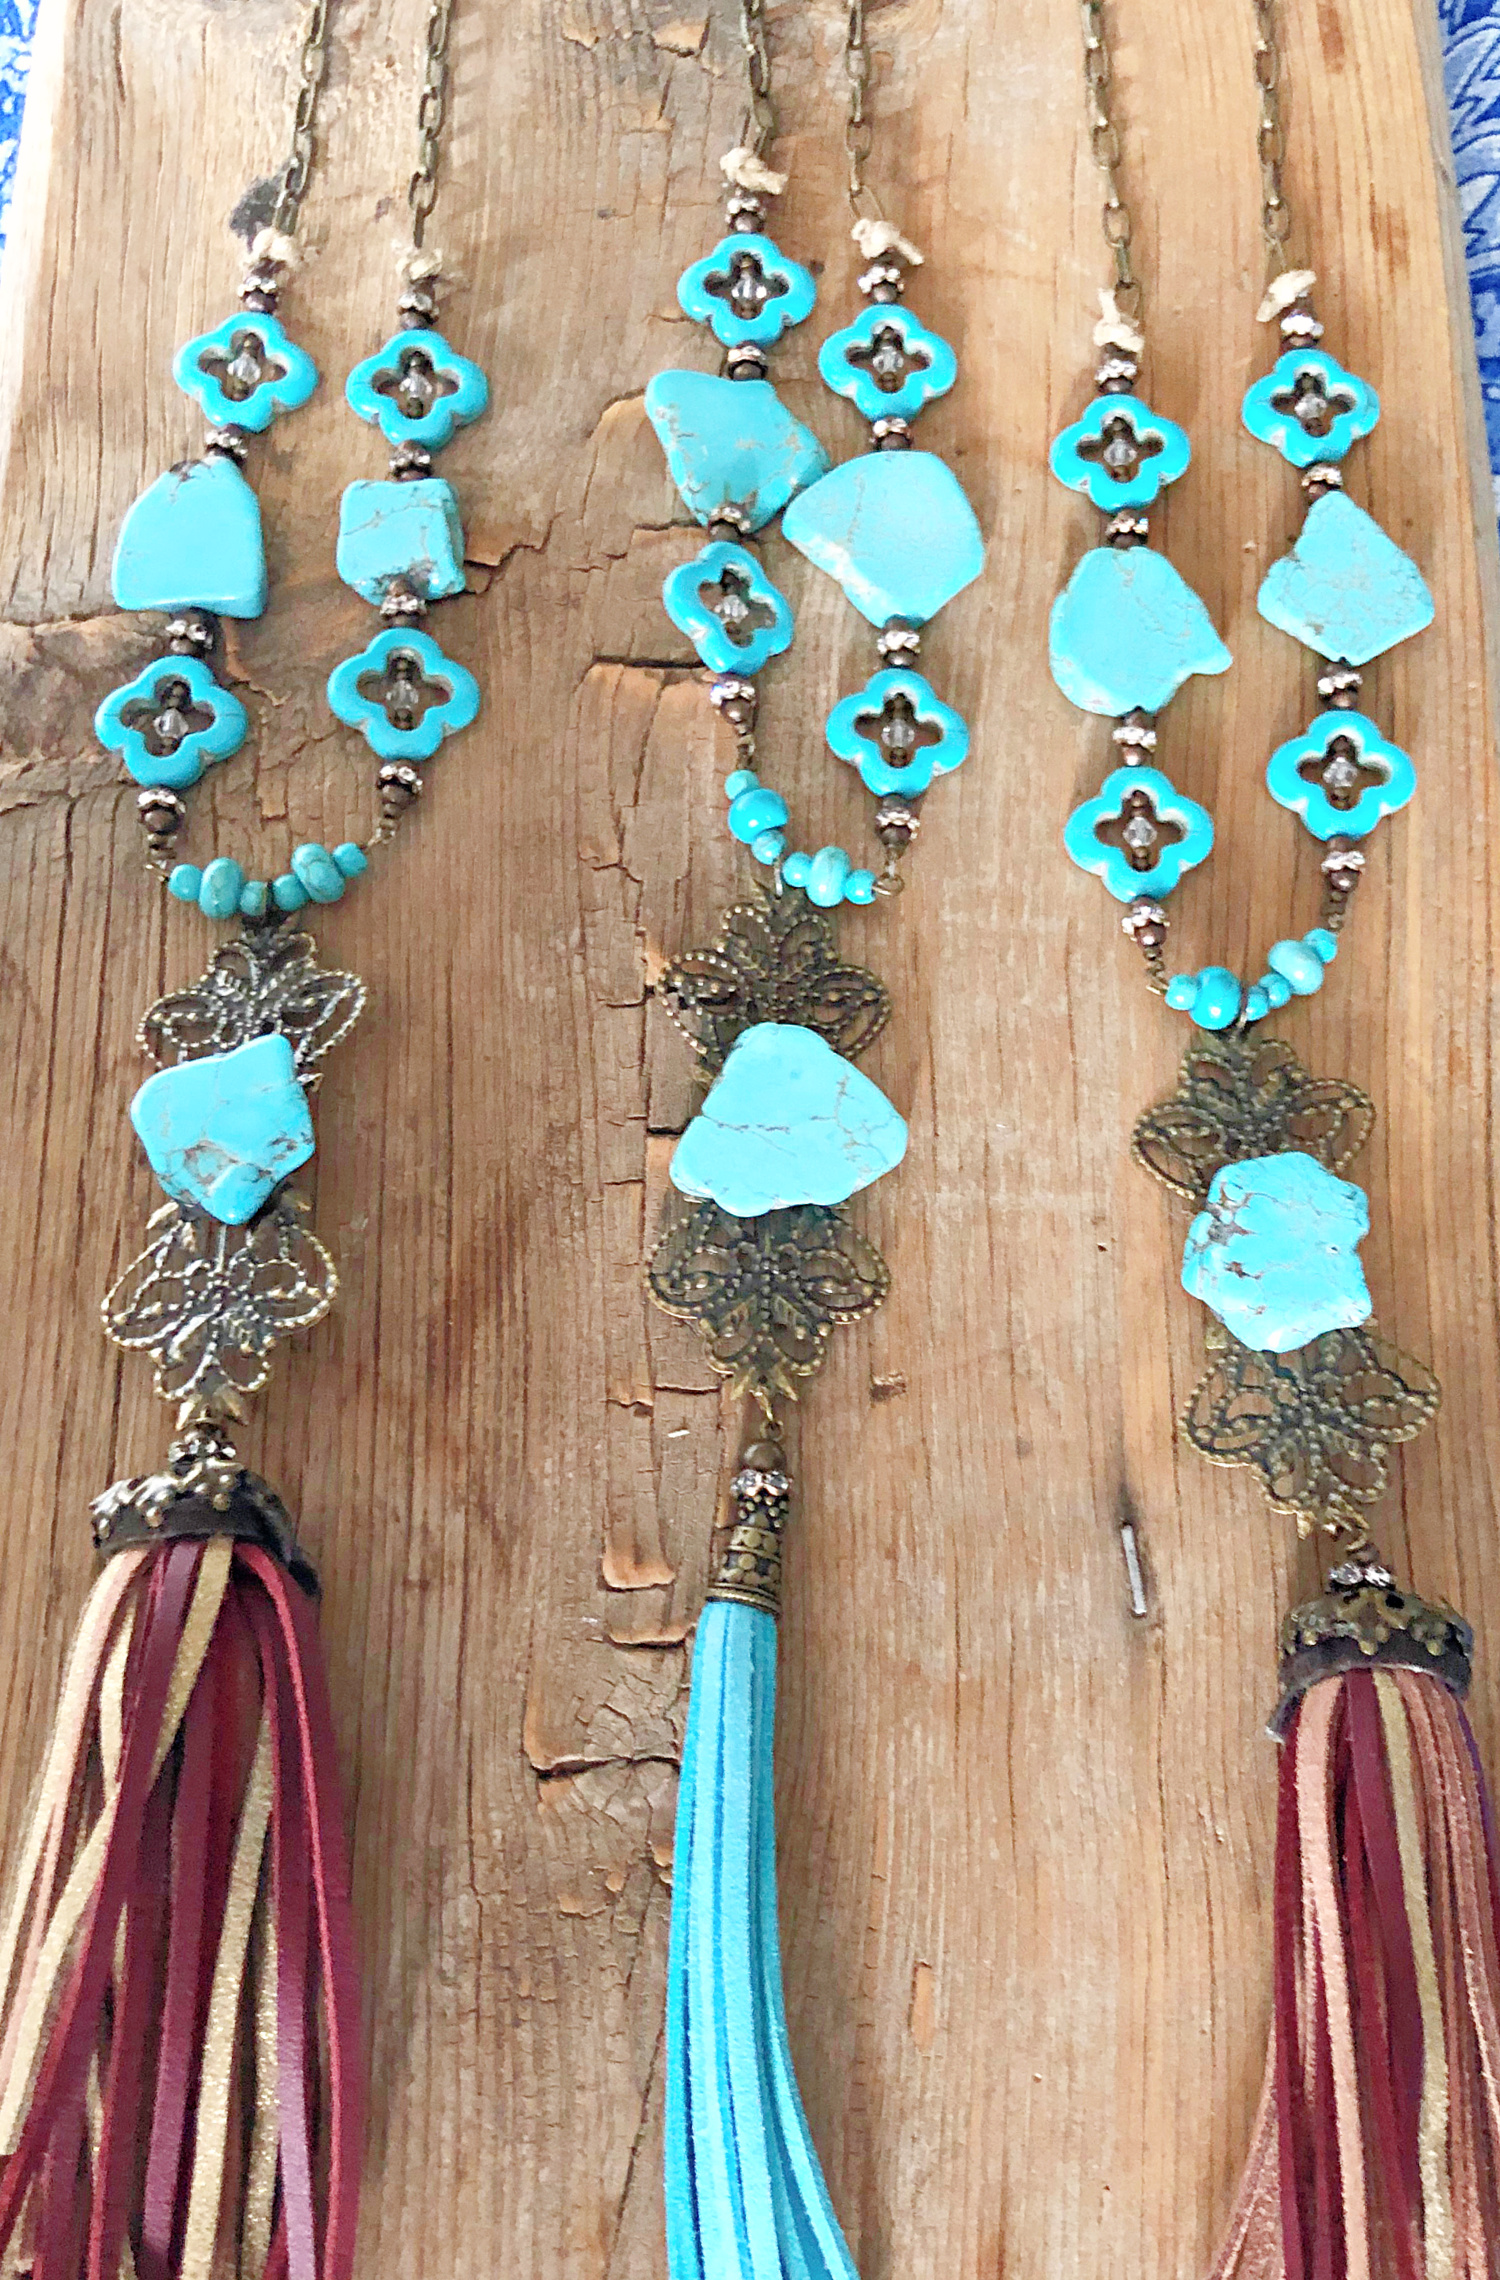 VINTAGE COWGIRL NECKLACE Leather Tassel Antique Bronze Filigree Pendant Turquoise Rhinestone Beaded Chain Necklace 2 STYLES